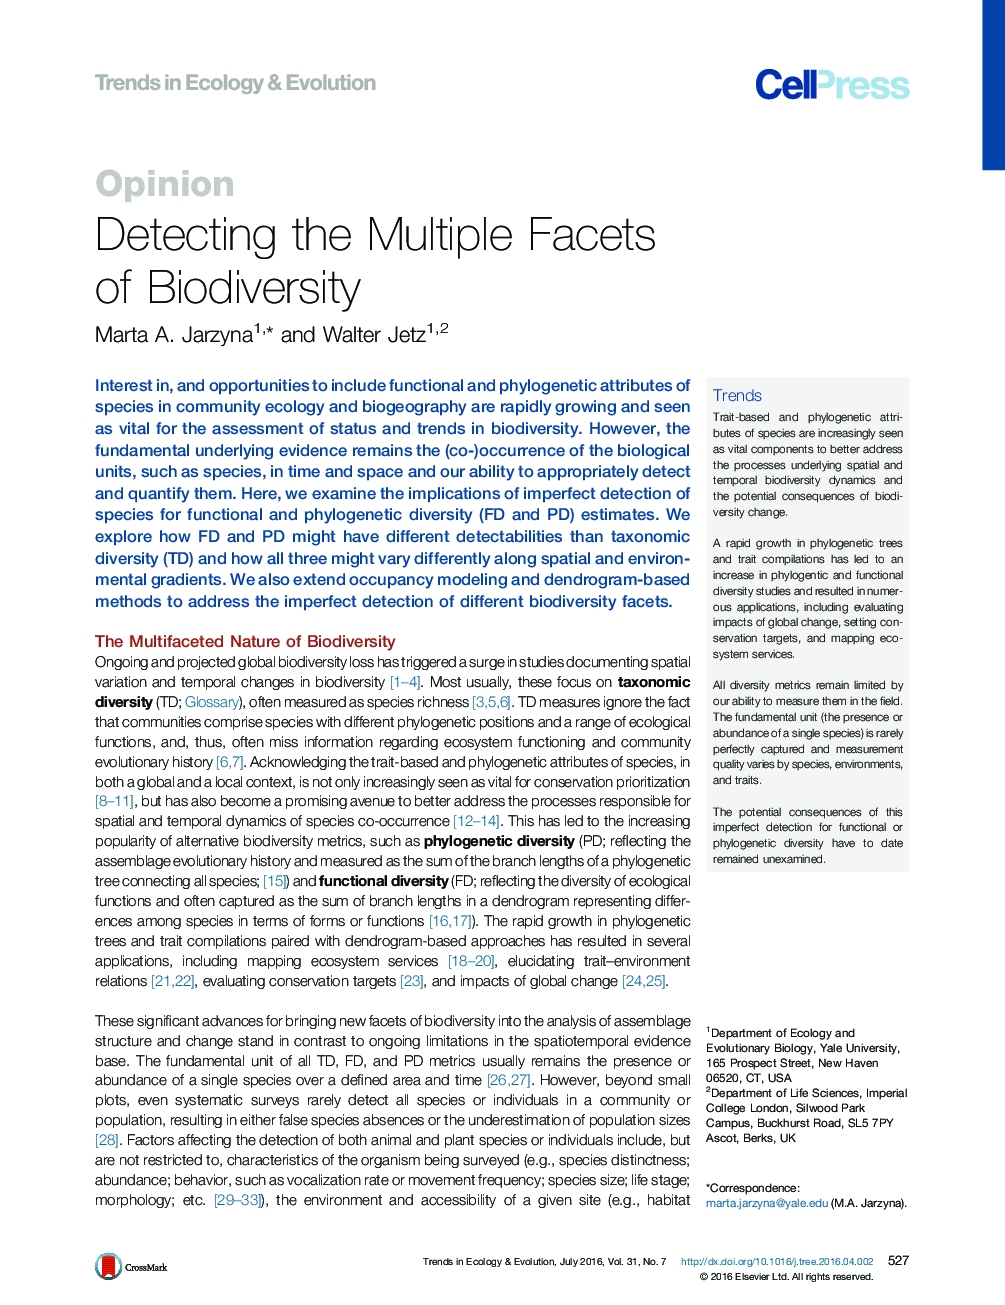 Detecting the Multiple Facets of Biodiversity